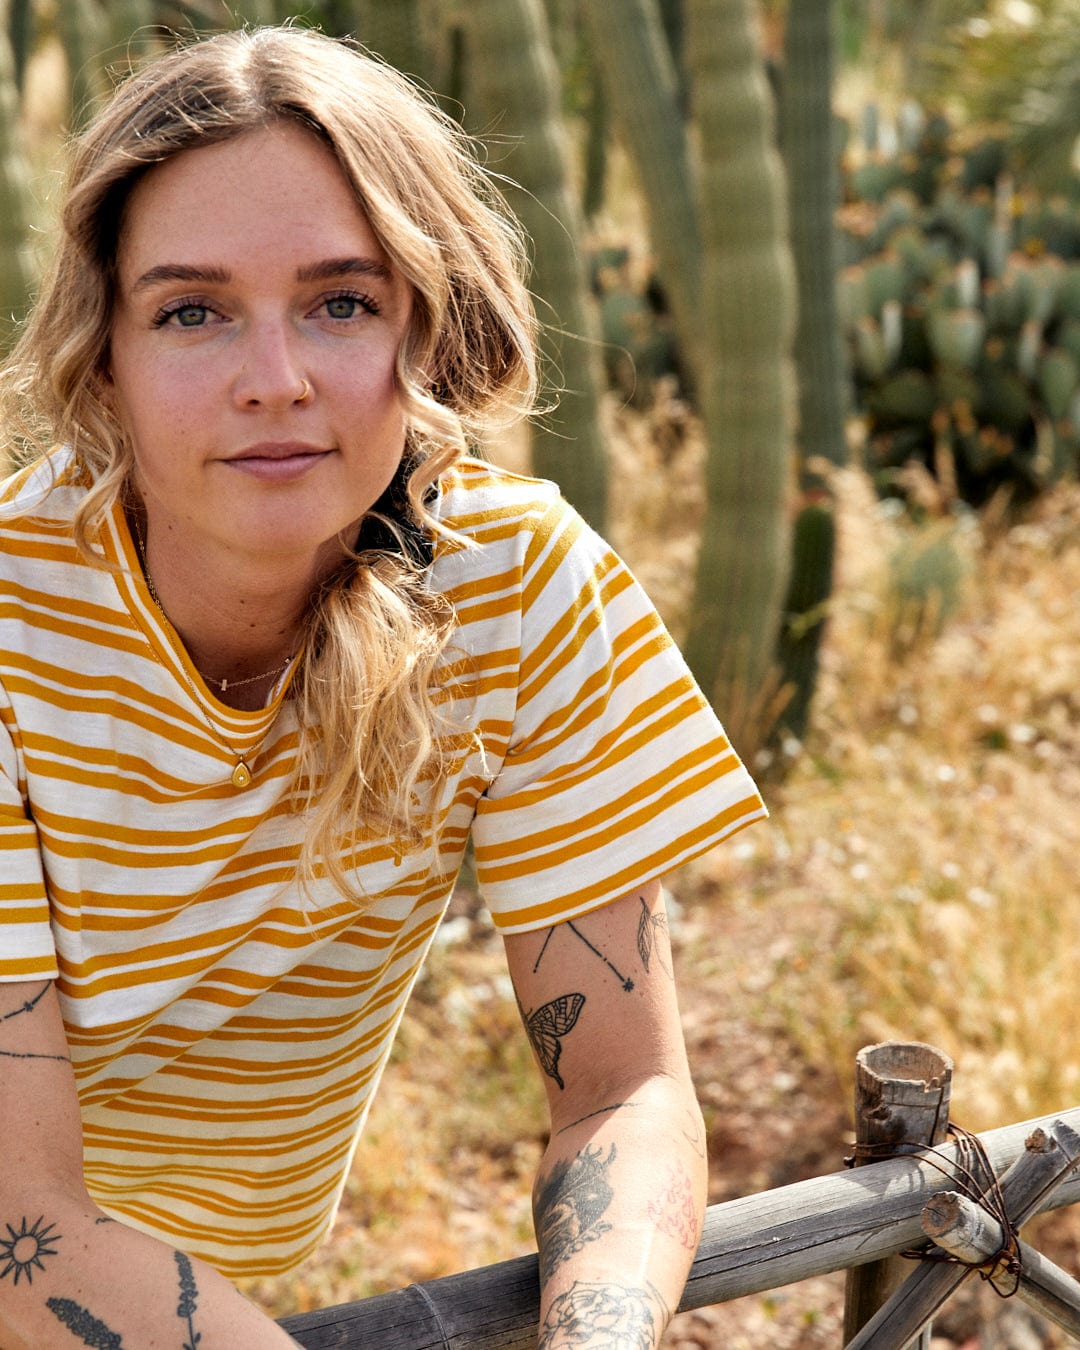 A woman with blonde hair, wearing a yellow Saltrock Sky - Womens Short Sleeve T-Shirt with yarn dye stripe print, leans on a wooden fence in front of tall cacti, looking at the camera.